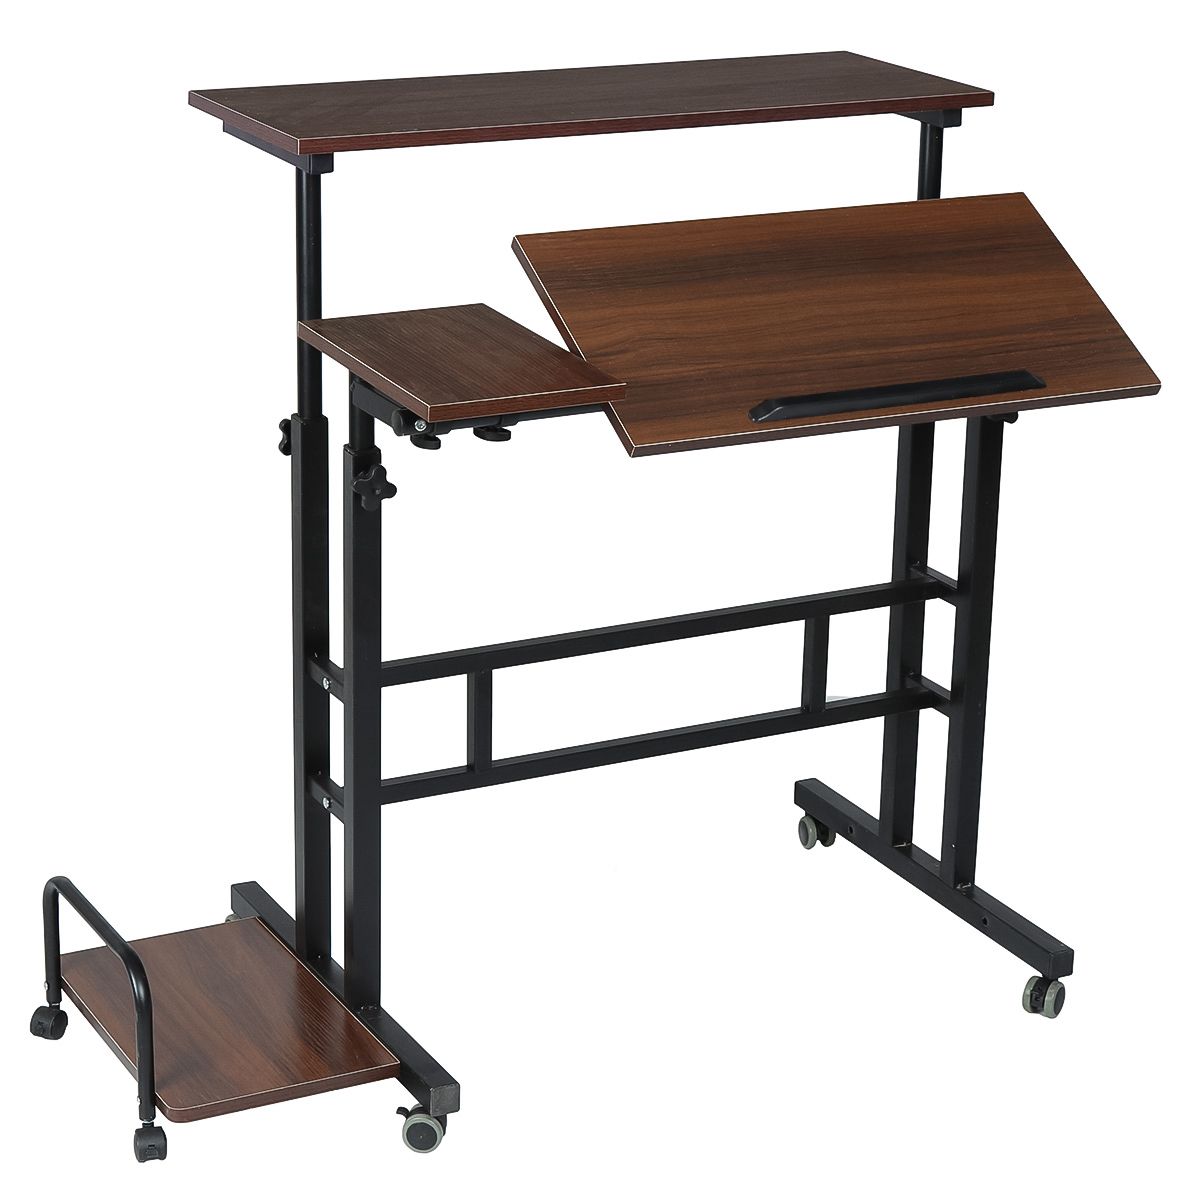 Mobile Stand Up Desk, Adjustable Laptop Desk With Wheels Host Storage For Well Known Sit Stand Mobile Desks (View 8 of 15)